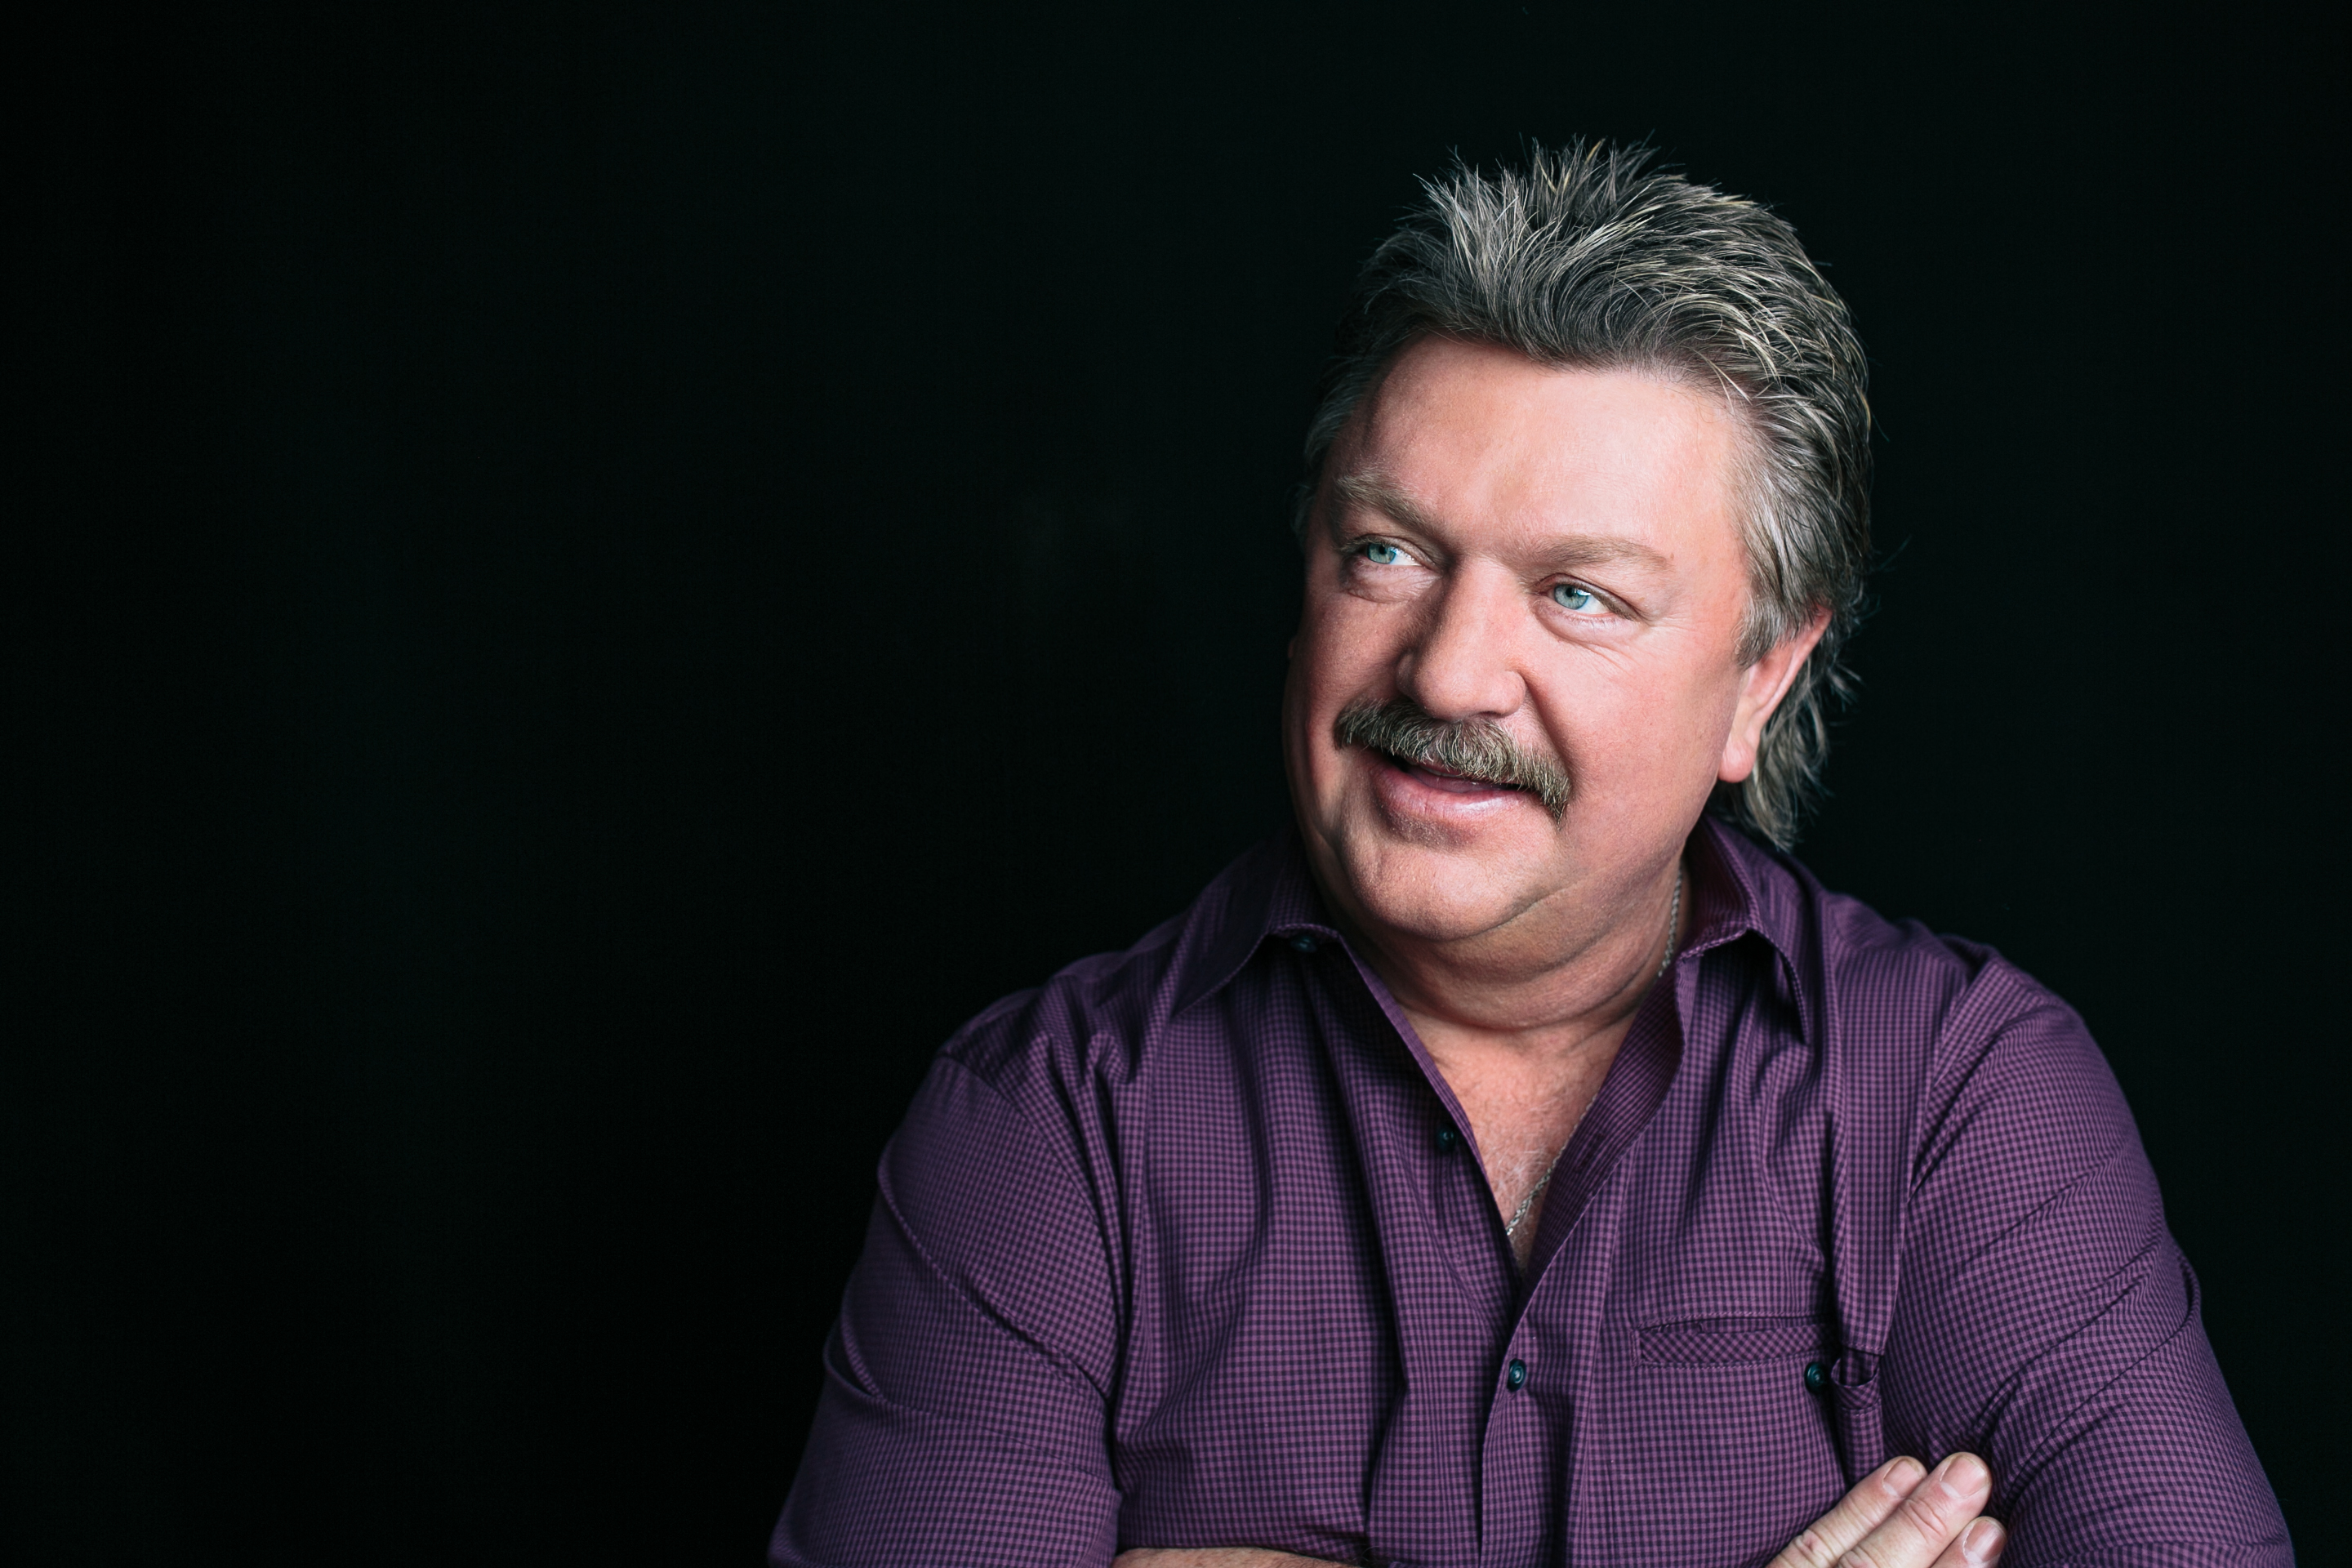 Joe Diffie Passed Away at Age 61 From Complications of Coronavirus (COVID-19)